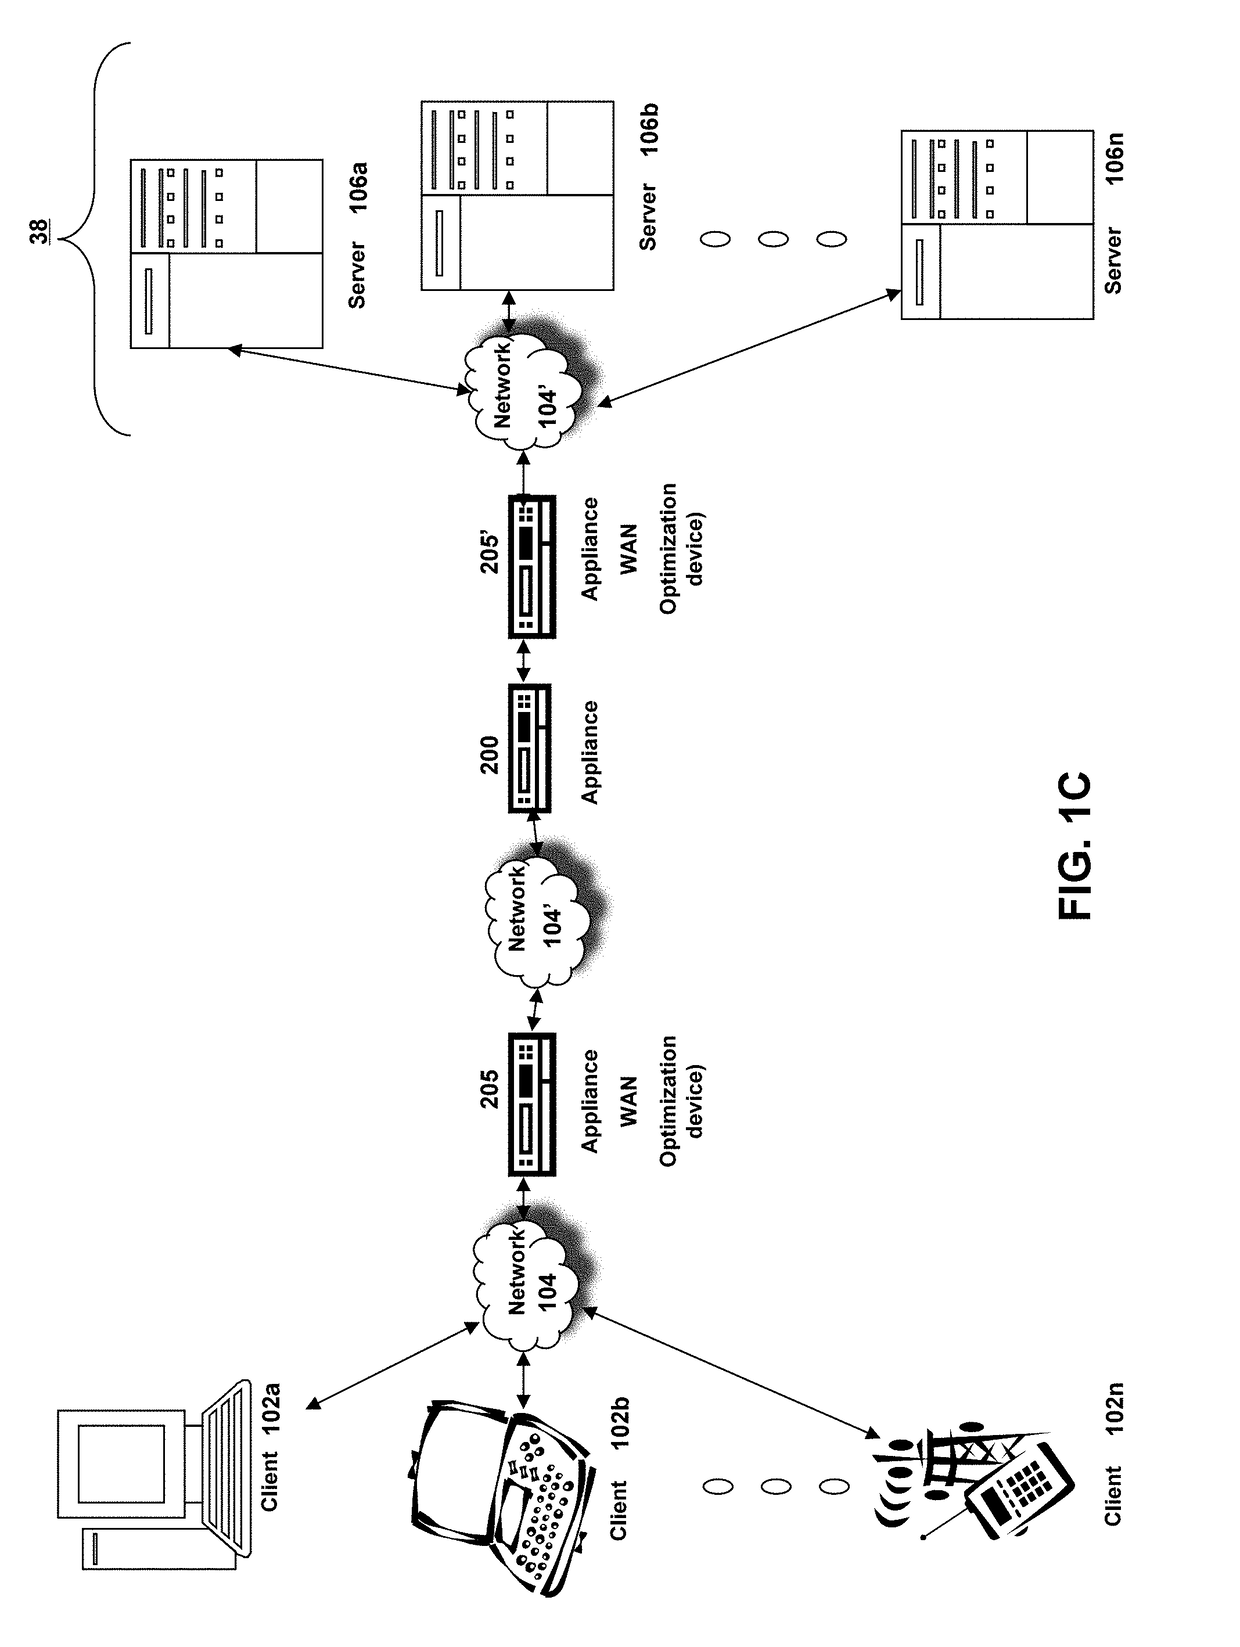 Systems and methods for configuring a device via a software-defined networking controller